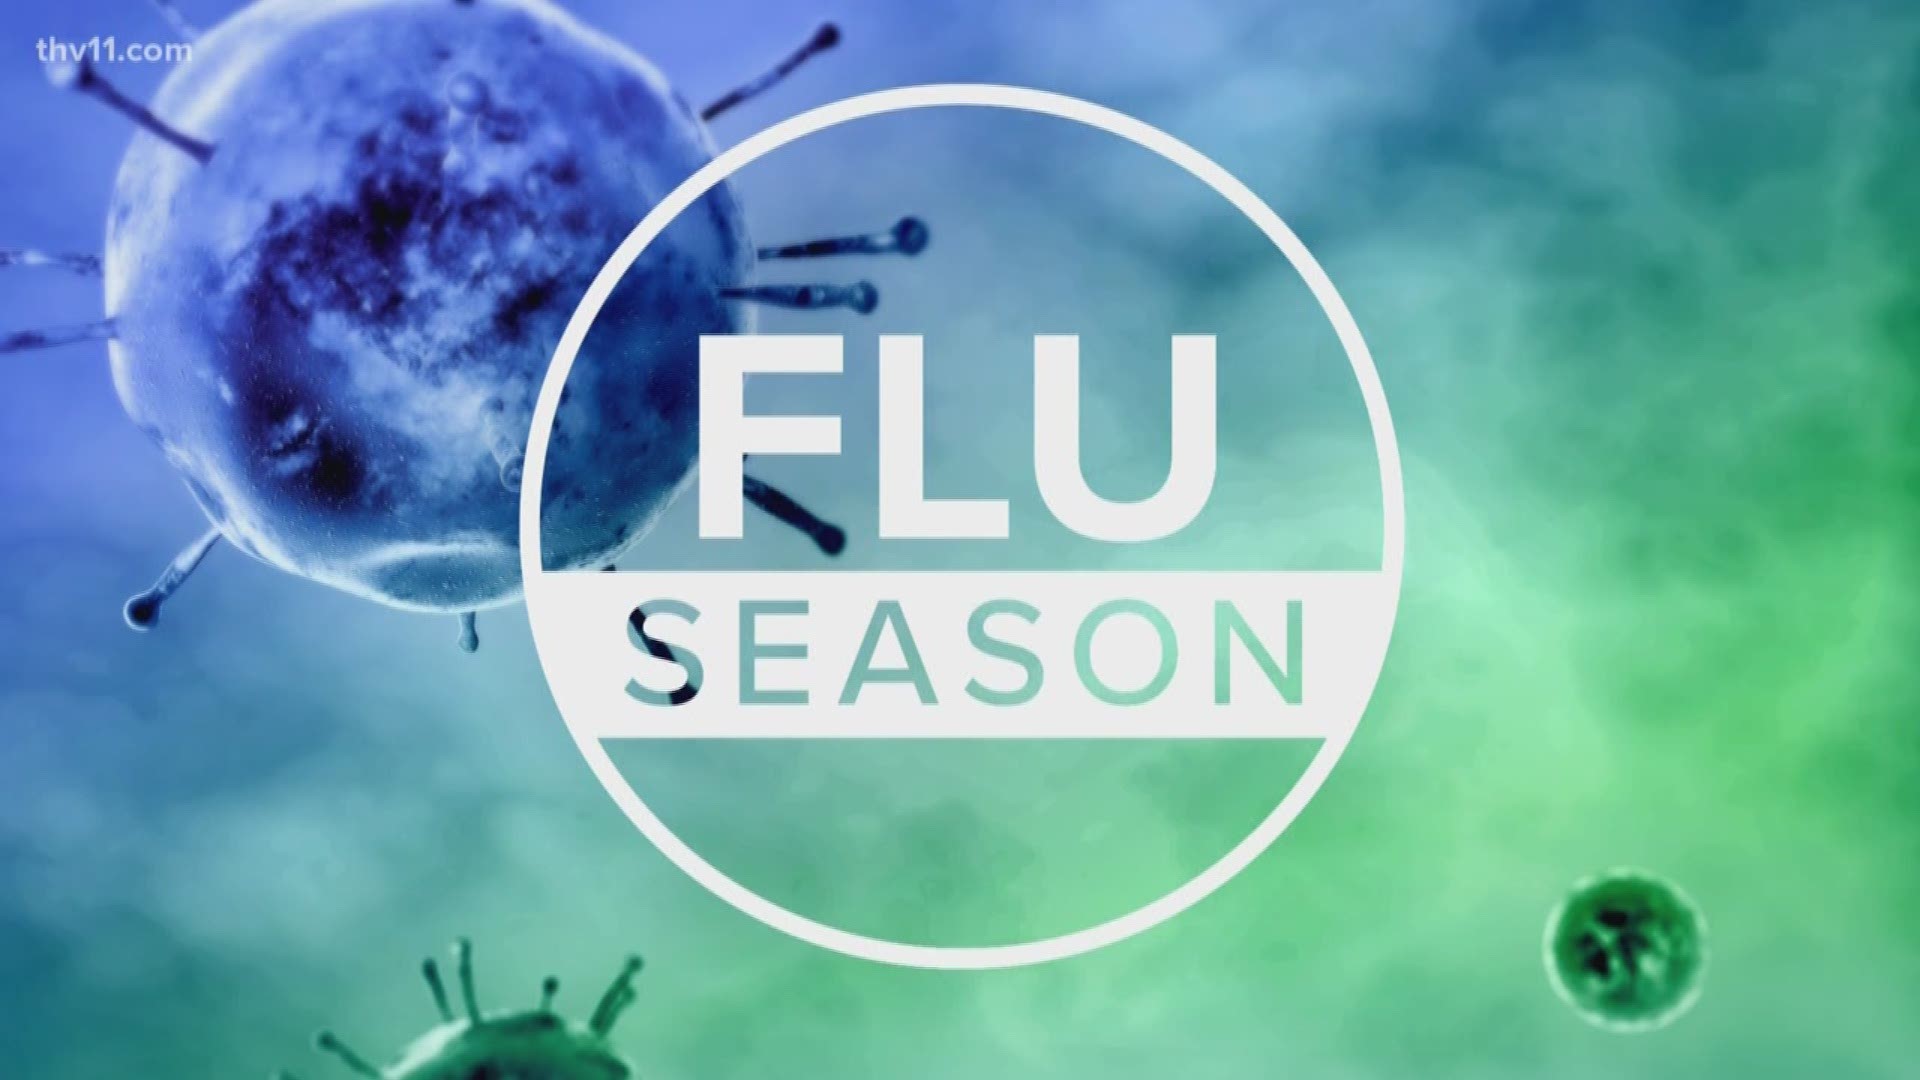 Six people in the state of Arkansas have died due to flu-related illness during the 2019-2020 flu season, according to the Arkansas Department of Health.